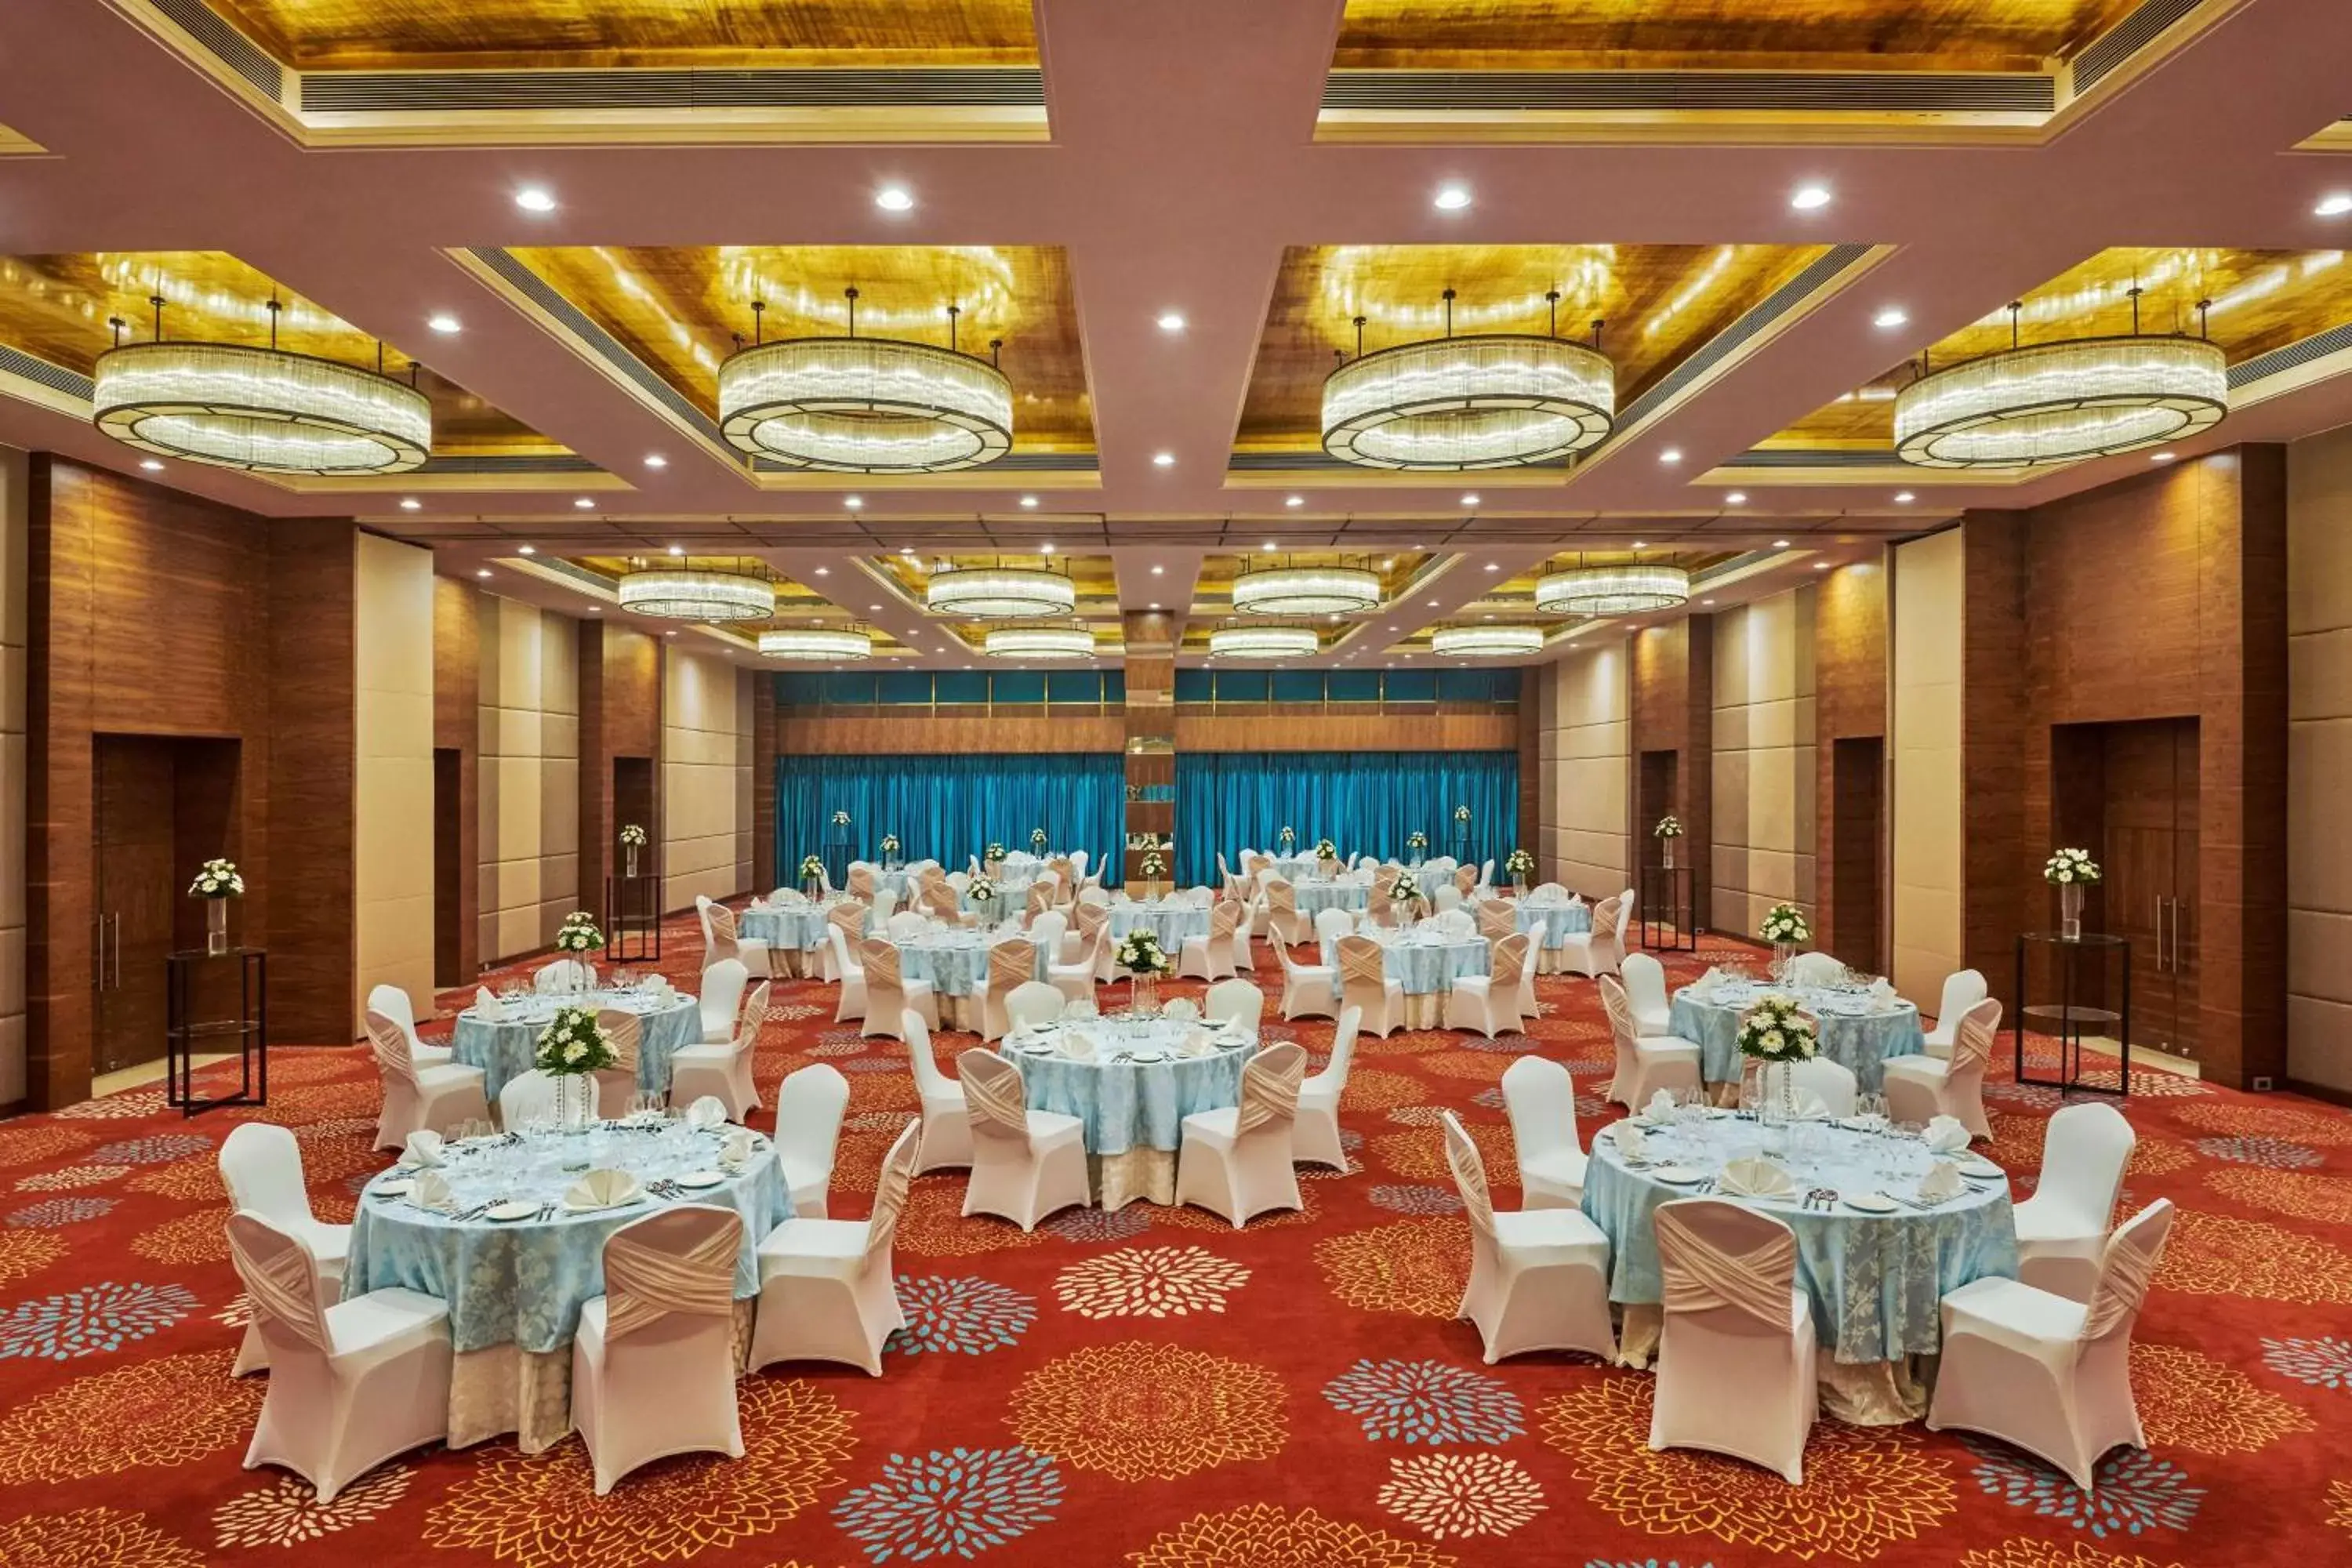 Meeting/conference room, Banquet Facilities in Hilton Garden Inn Lucknow